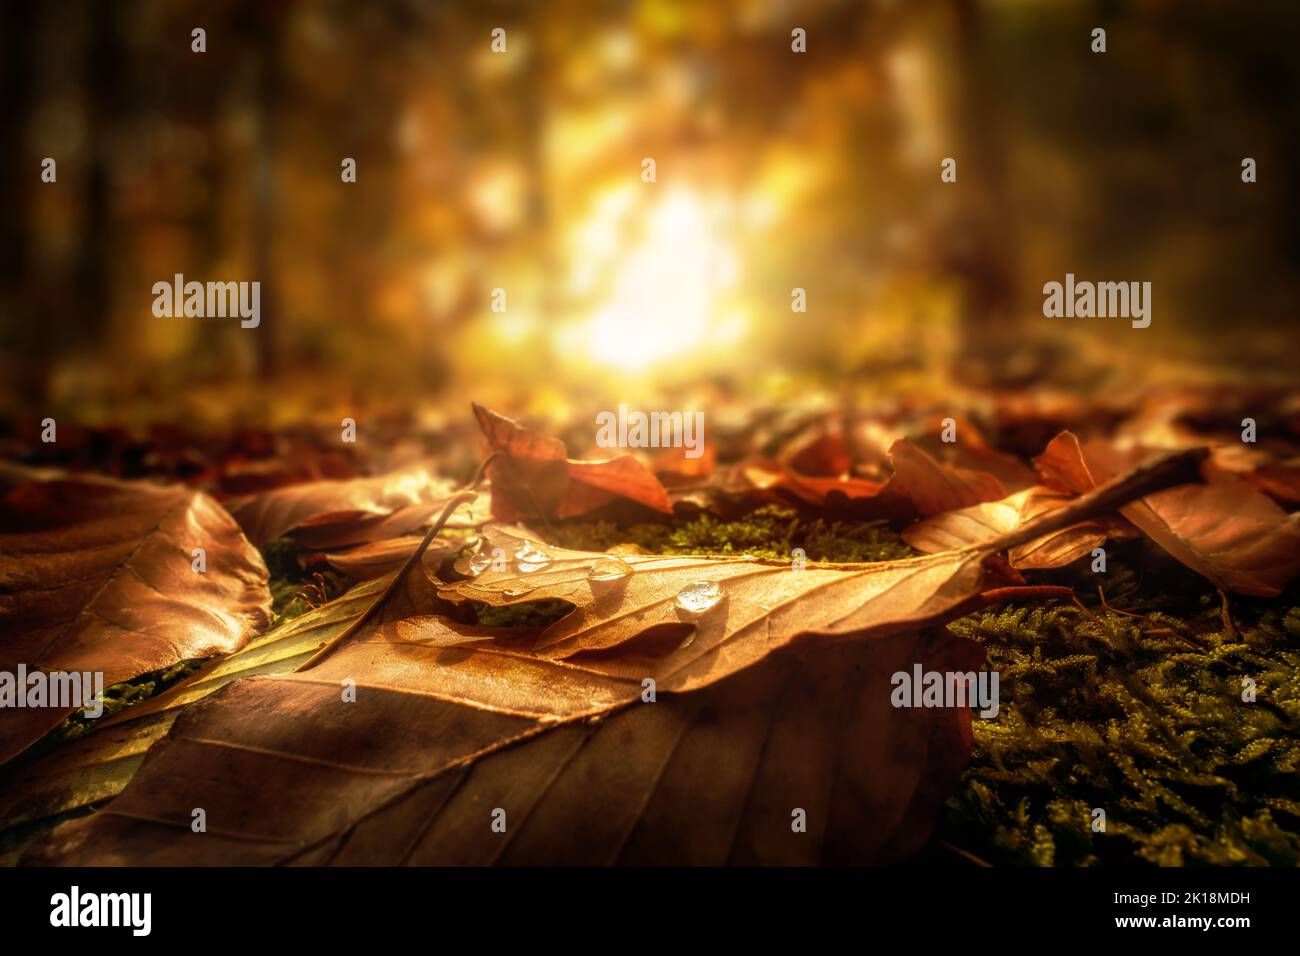 Closeup of Autumn leaves with drops of water on the forest ground, with the setting sun in the background Stock Photo